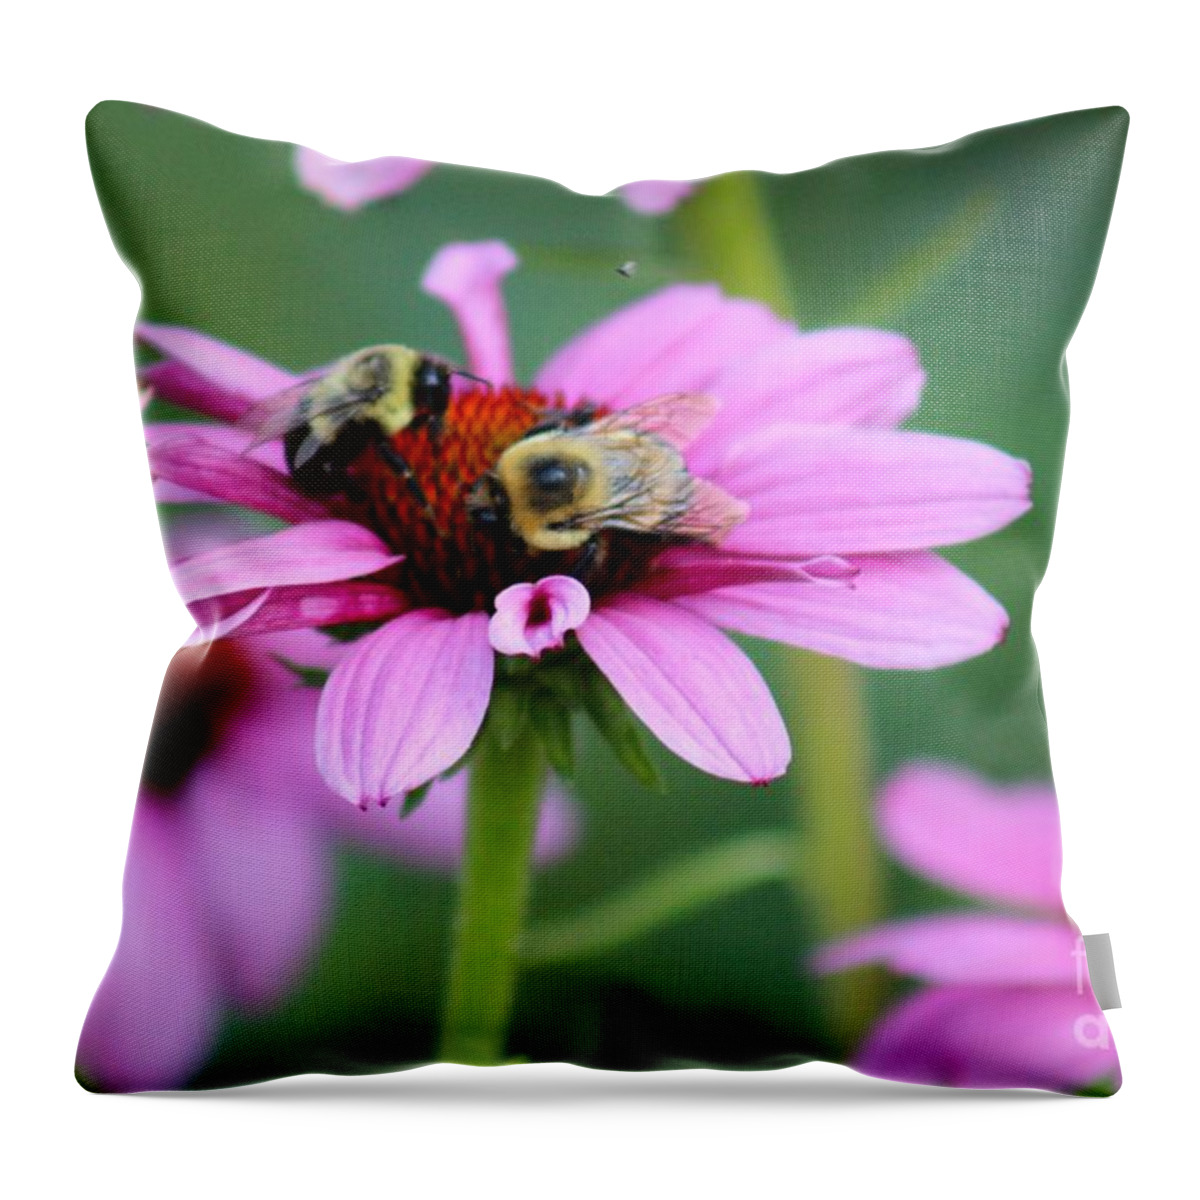 Pink Throw Pillow featuring the photograph Nature's Beauty 69 by Deena Withycombe